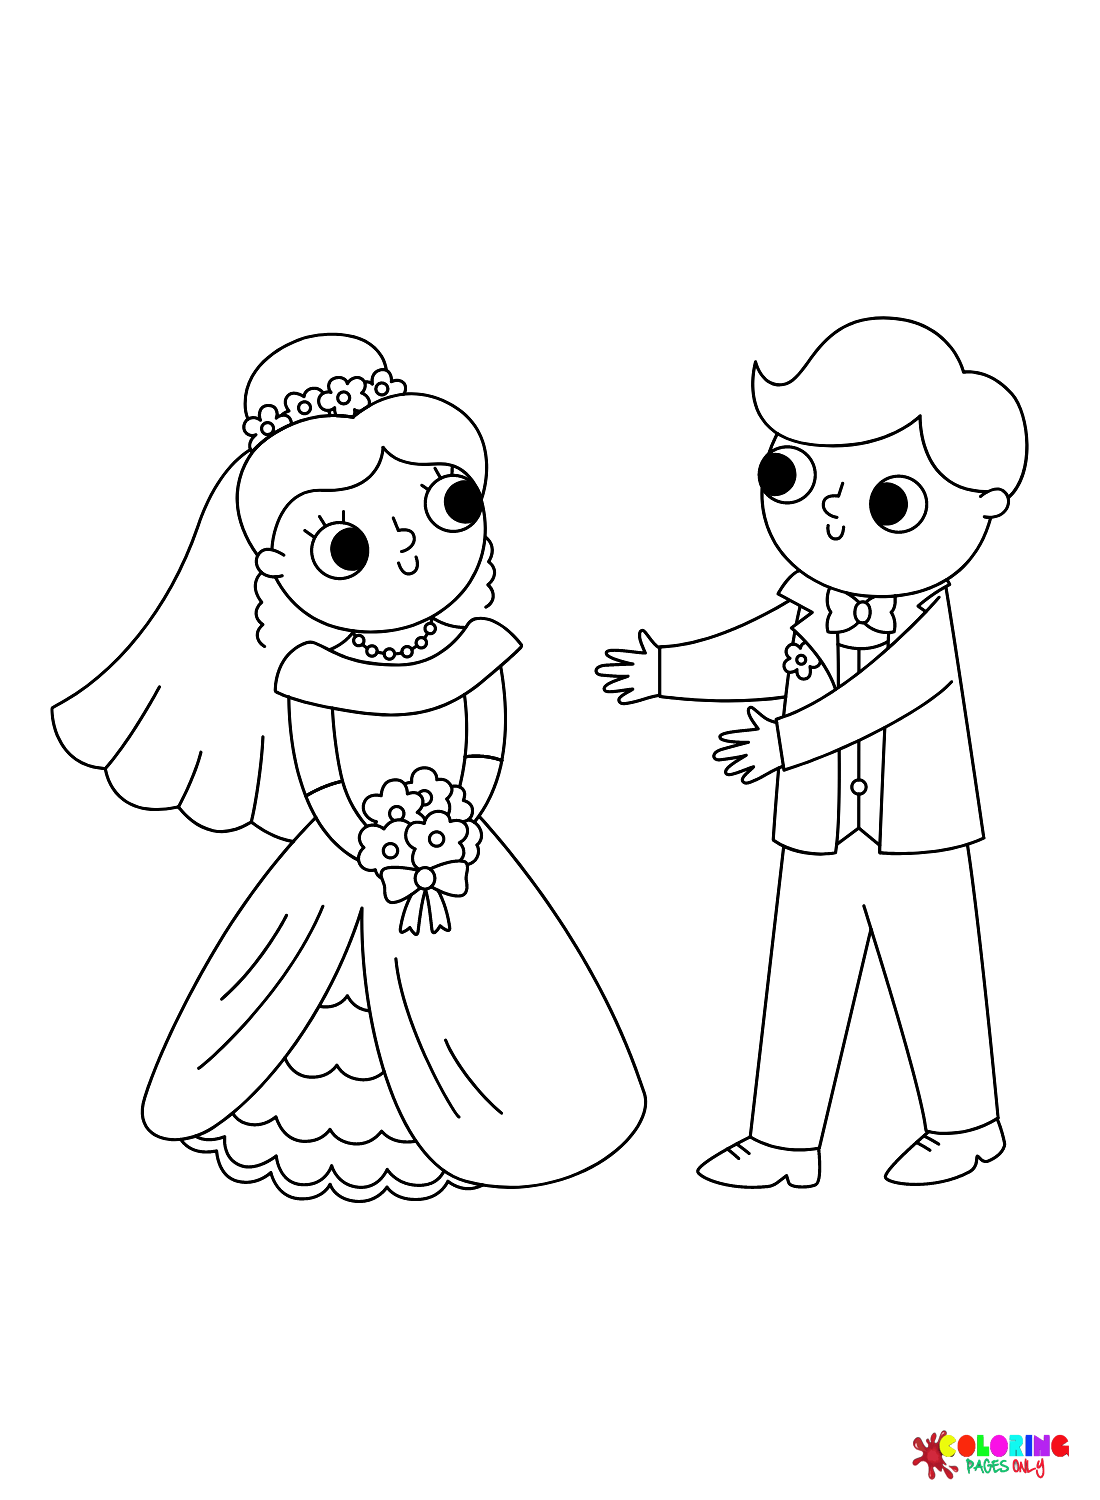 Printable Bride and Groom Coloring Page